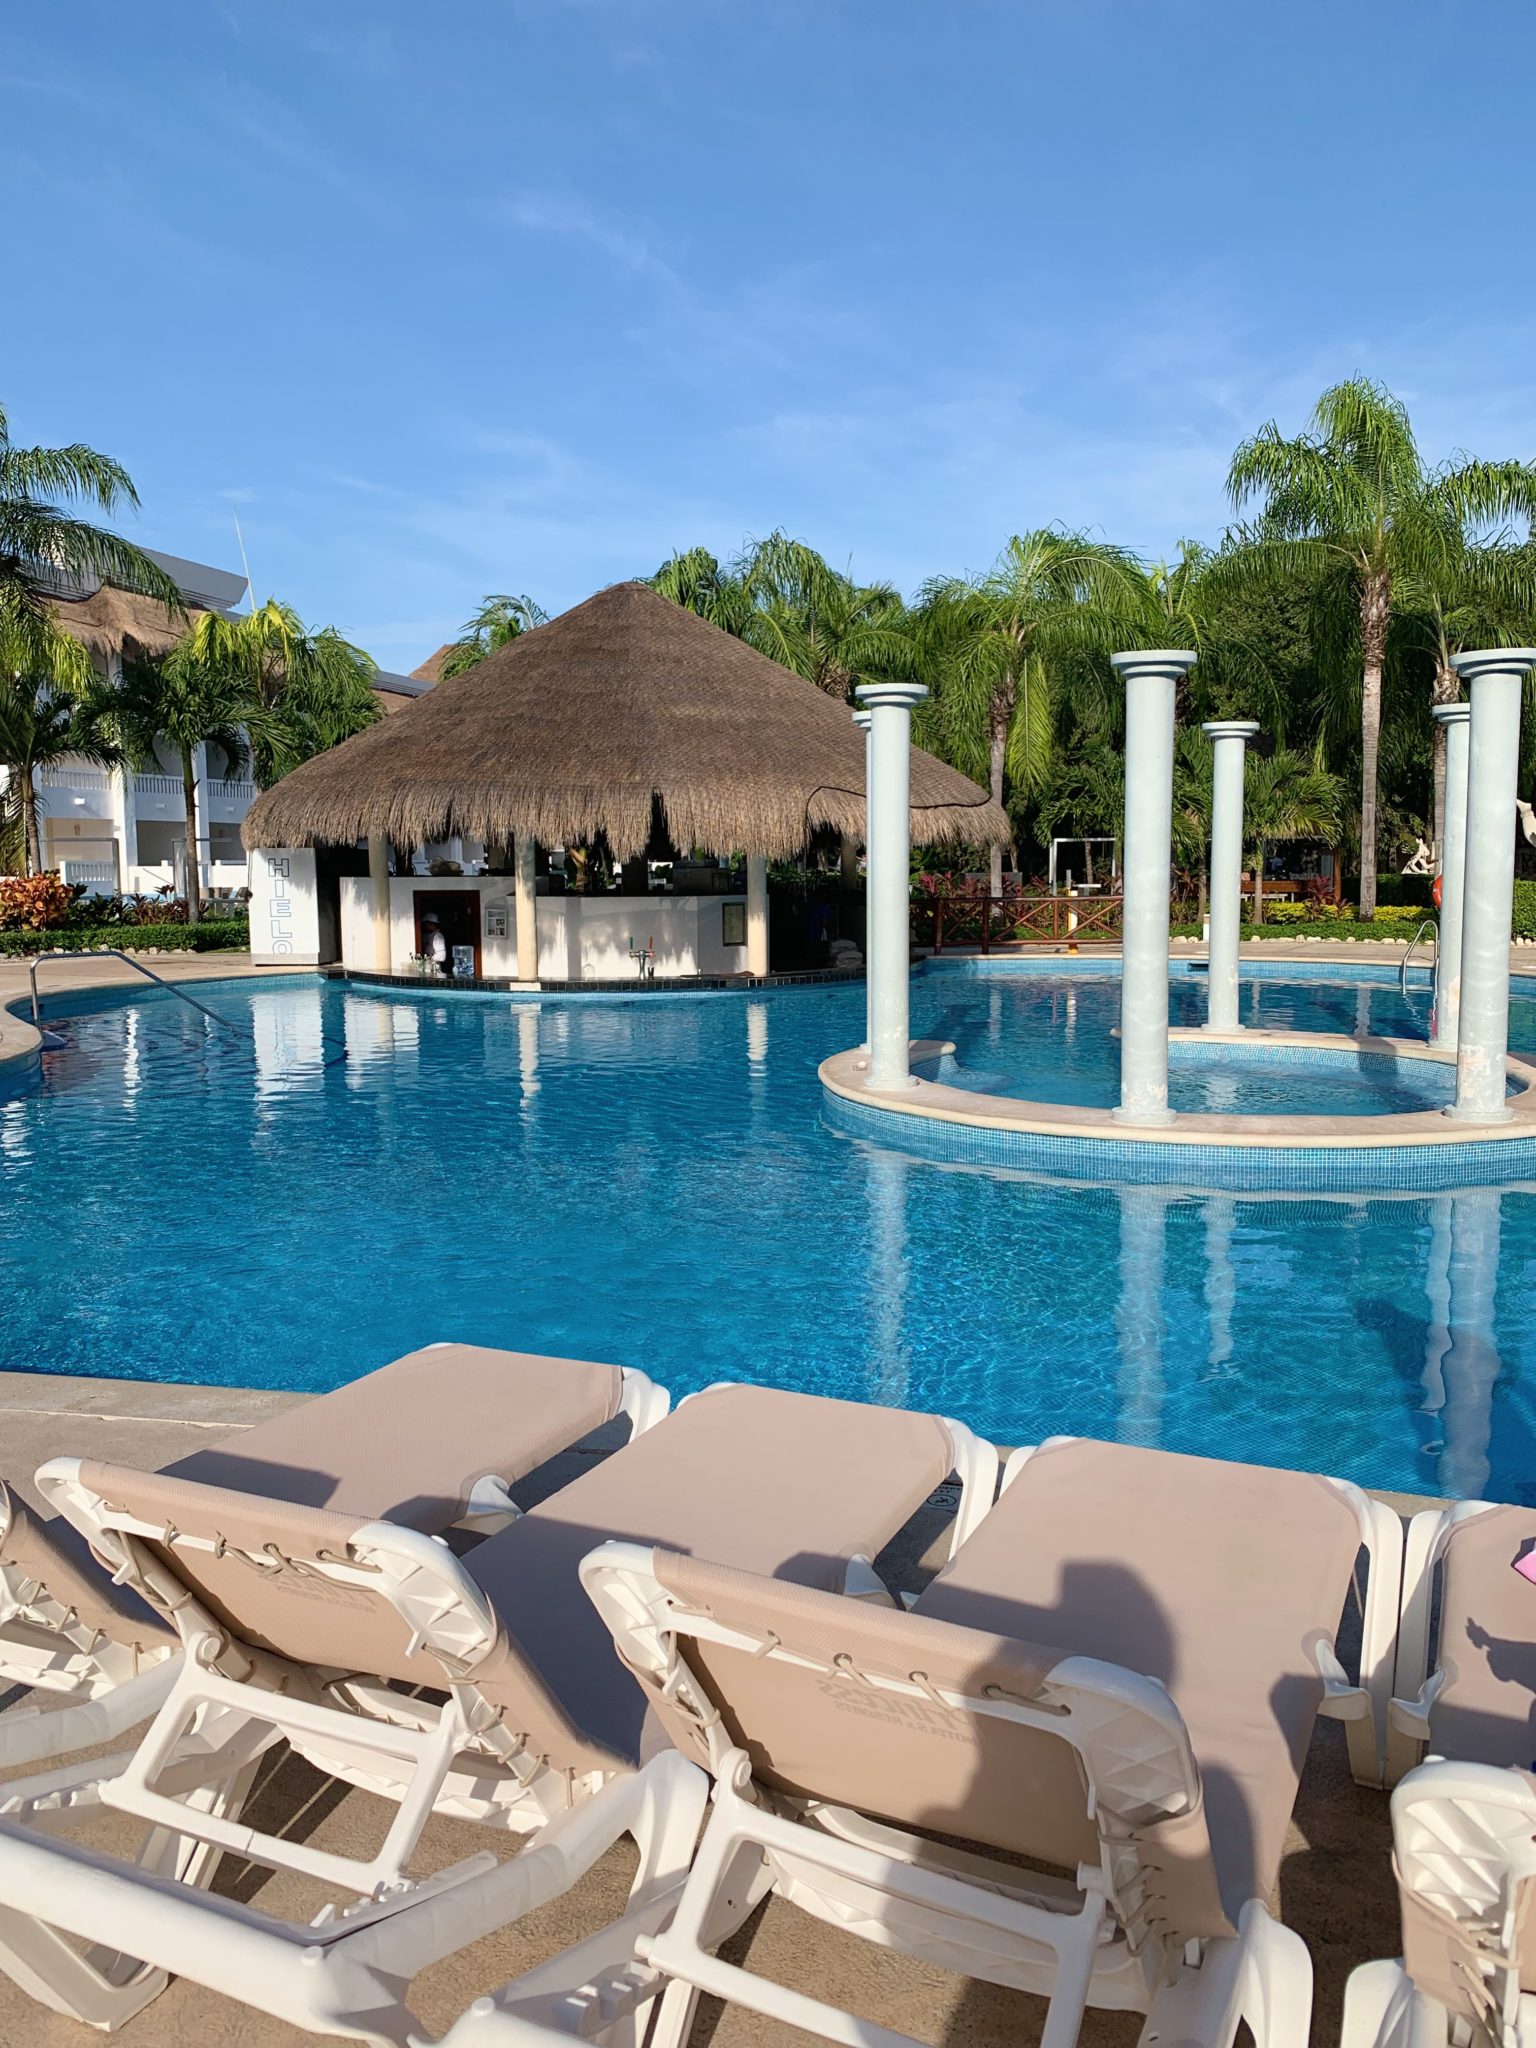 Grand Sunset Princess Resort Review in Mexico